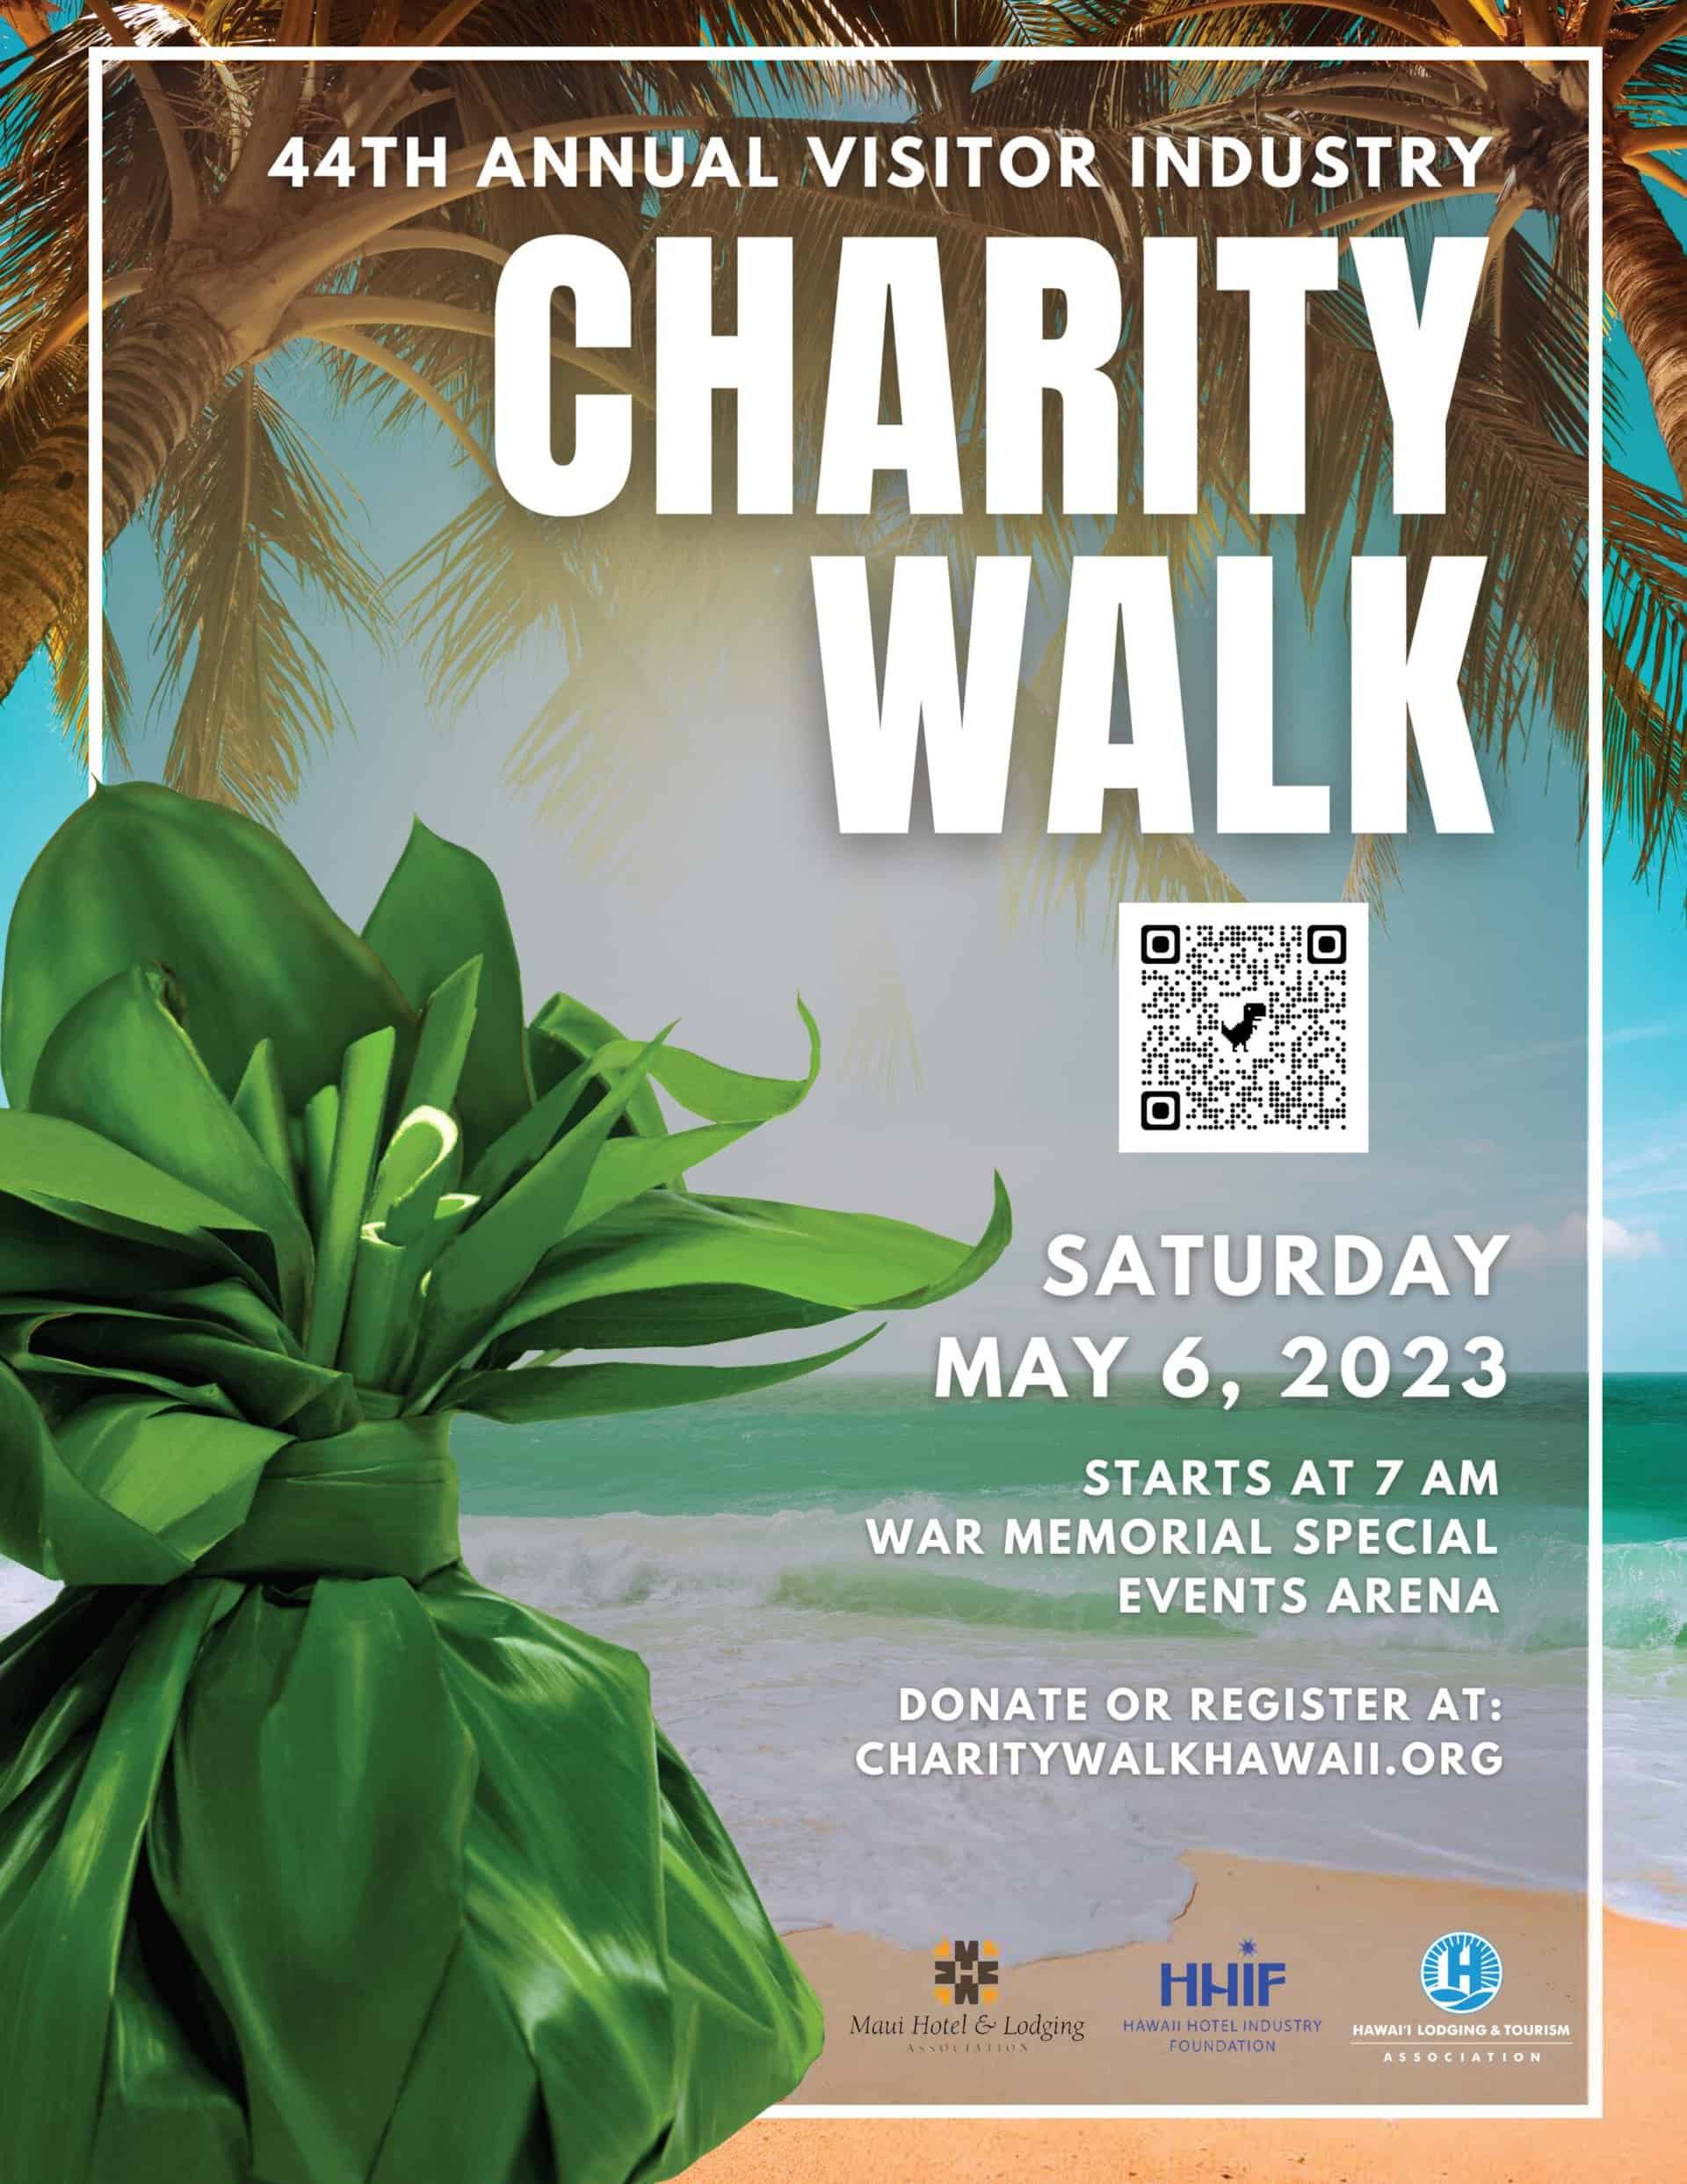 44th Annual Visitor Industry Charity Walk